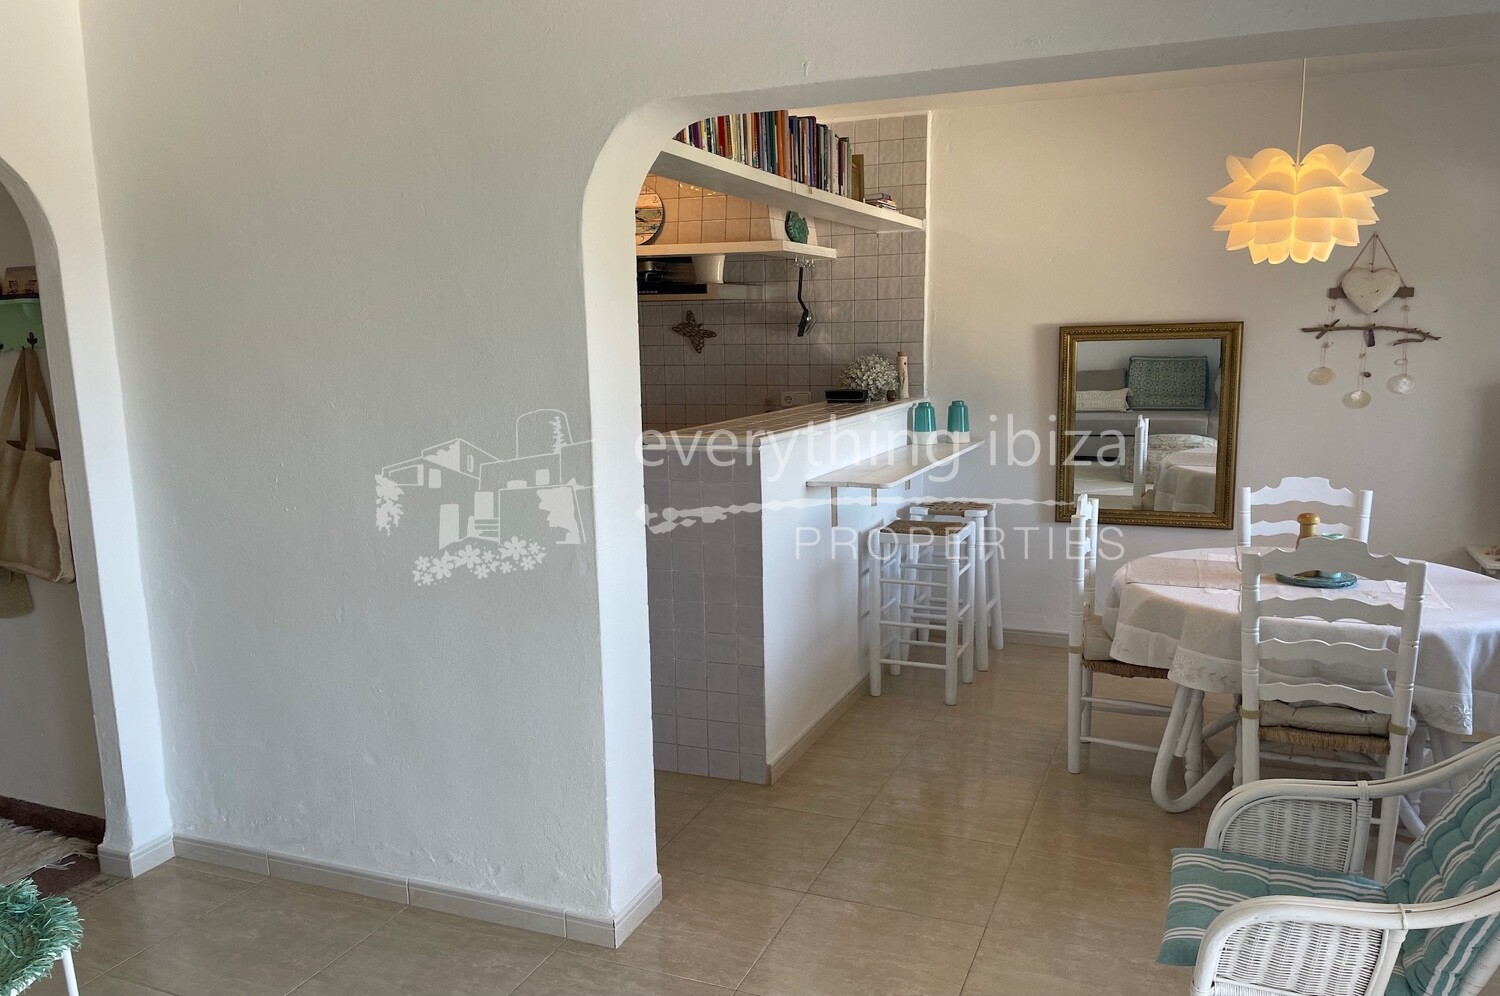 Renovated & Furnished Apartment Close to the Beach, ref. 1473, for sale in Ibiza by everything ibiza Properties